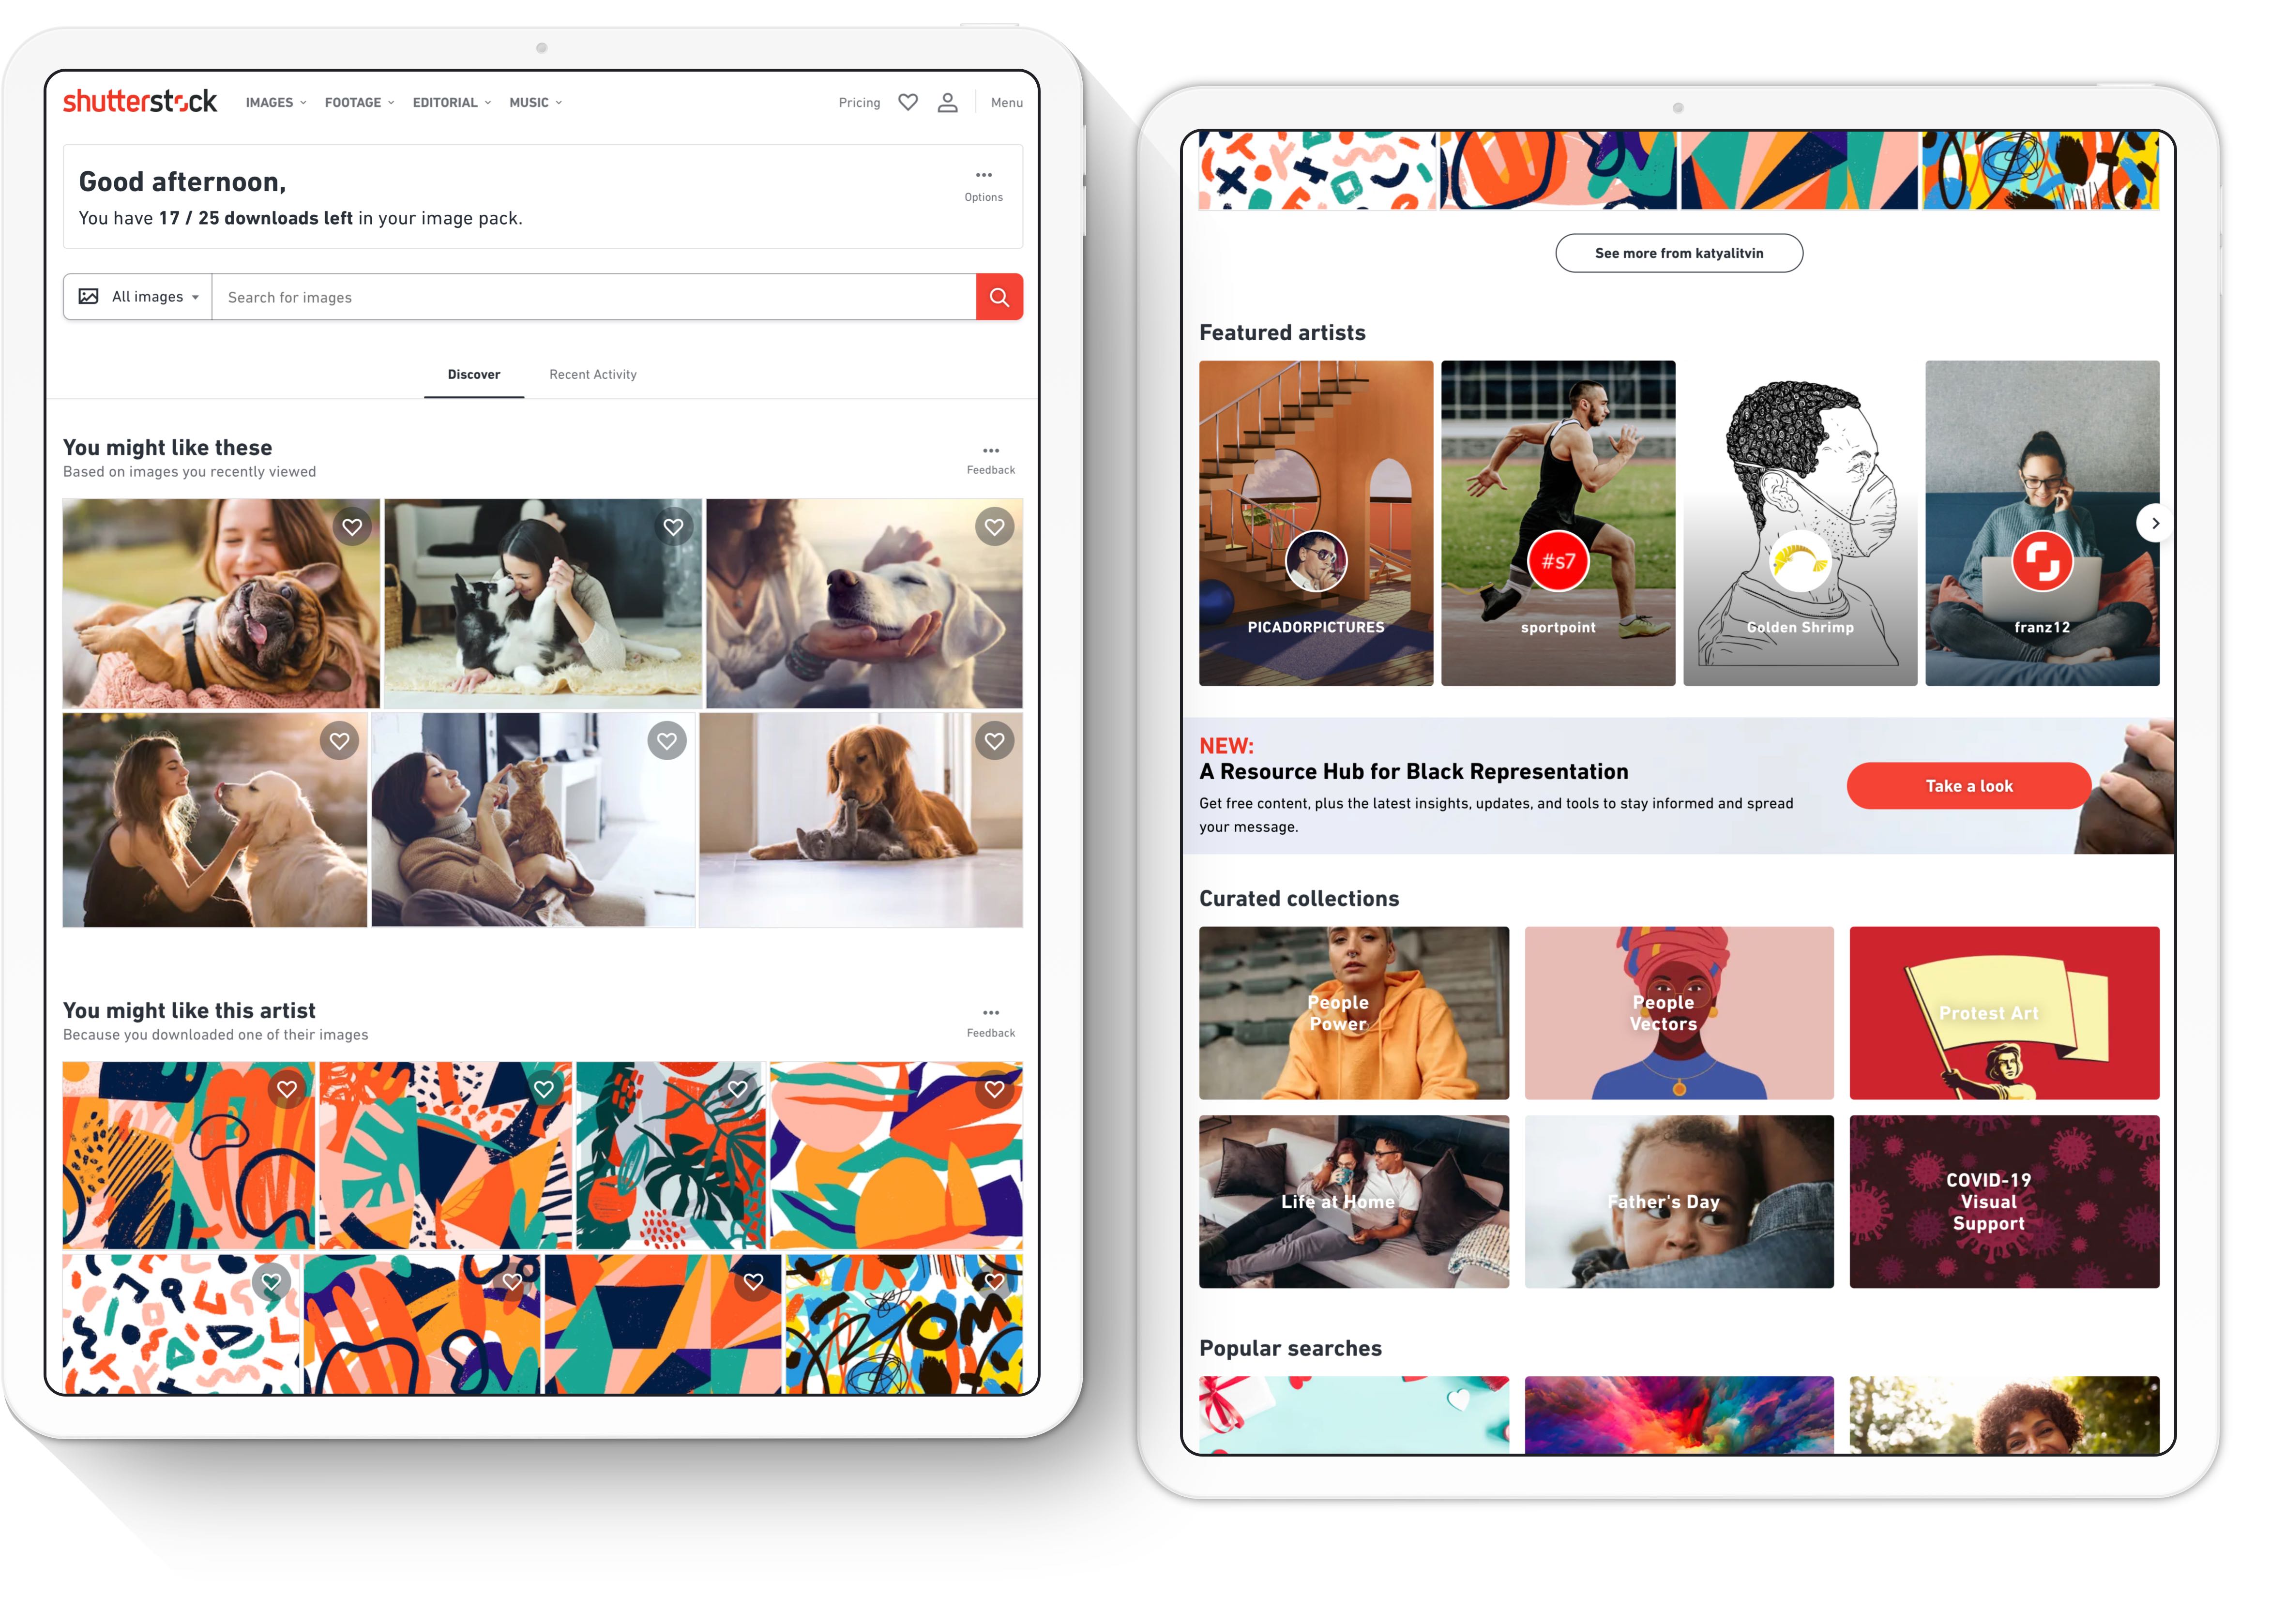 The Shutterstock logged-in homepage on iPad Pro